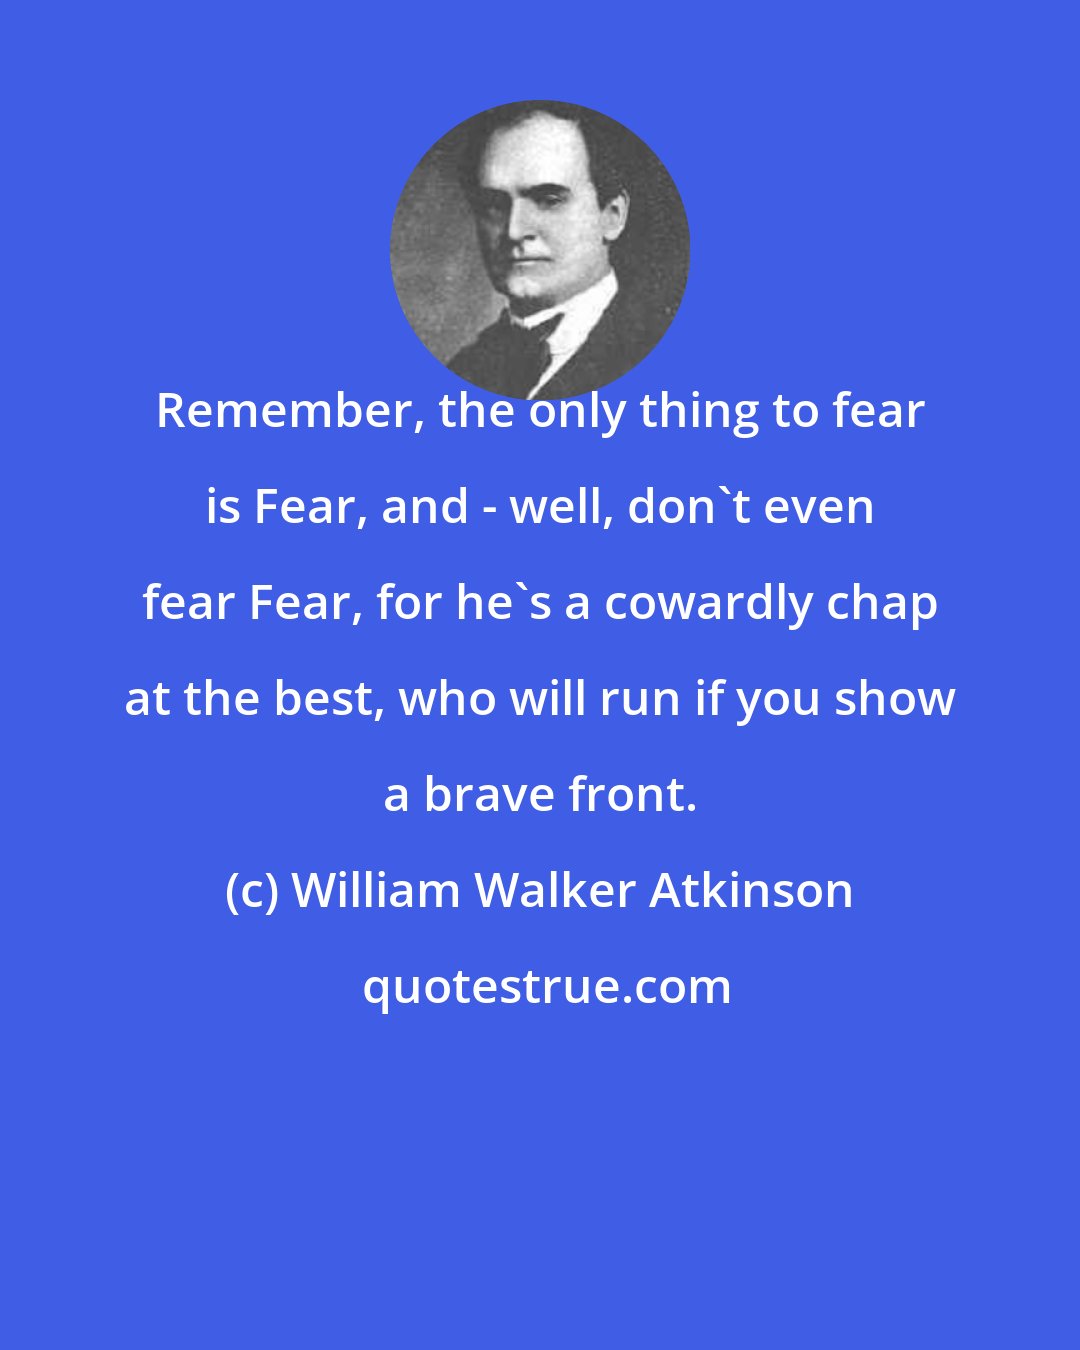 William Walker Atkinson: Remember, the only thing to fear is Fear, and - well, don't even fear Fear, for he's a cowardly chap at the best, who will run if you show a brave front.